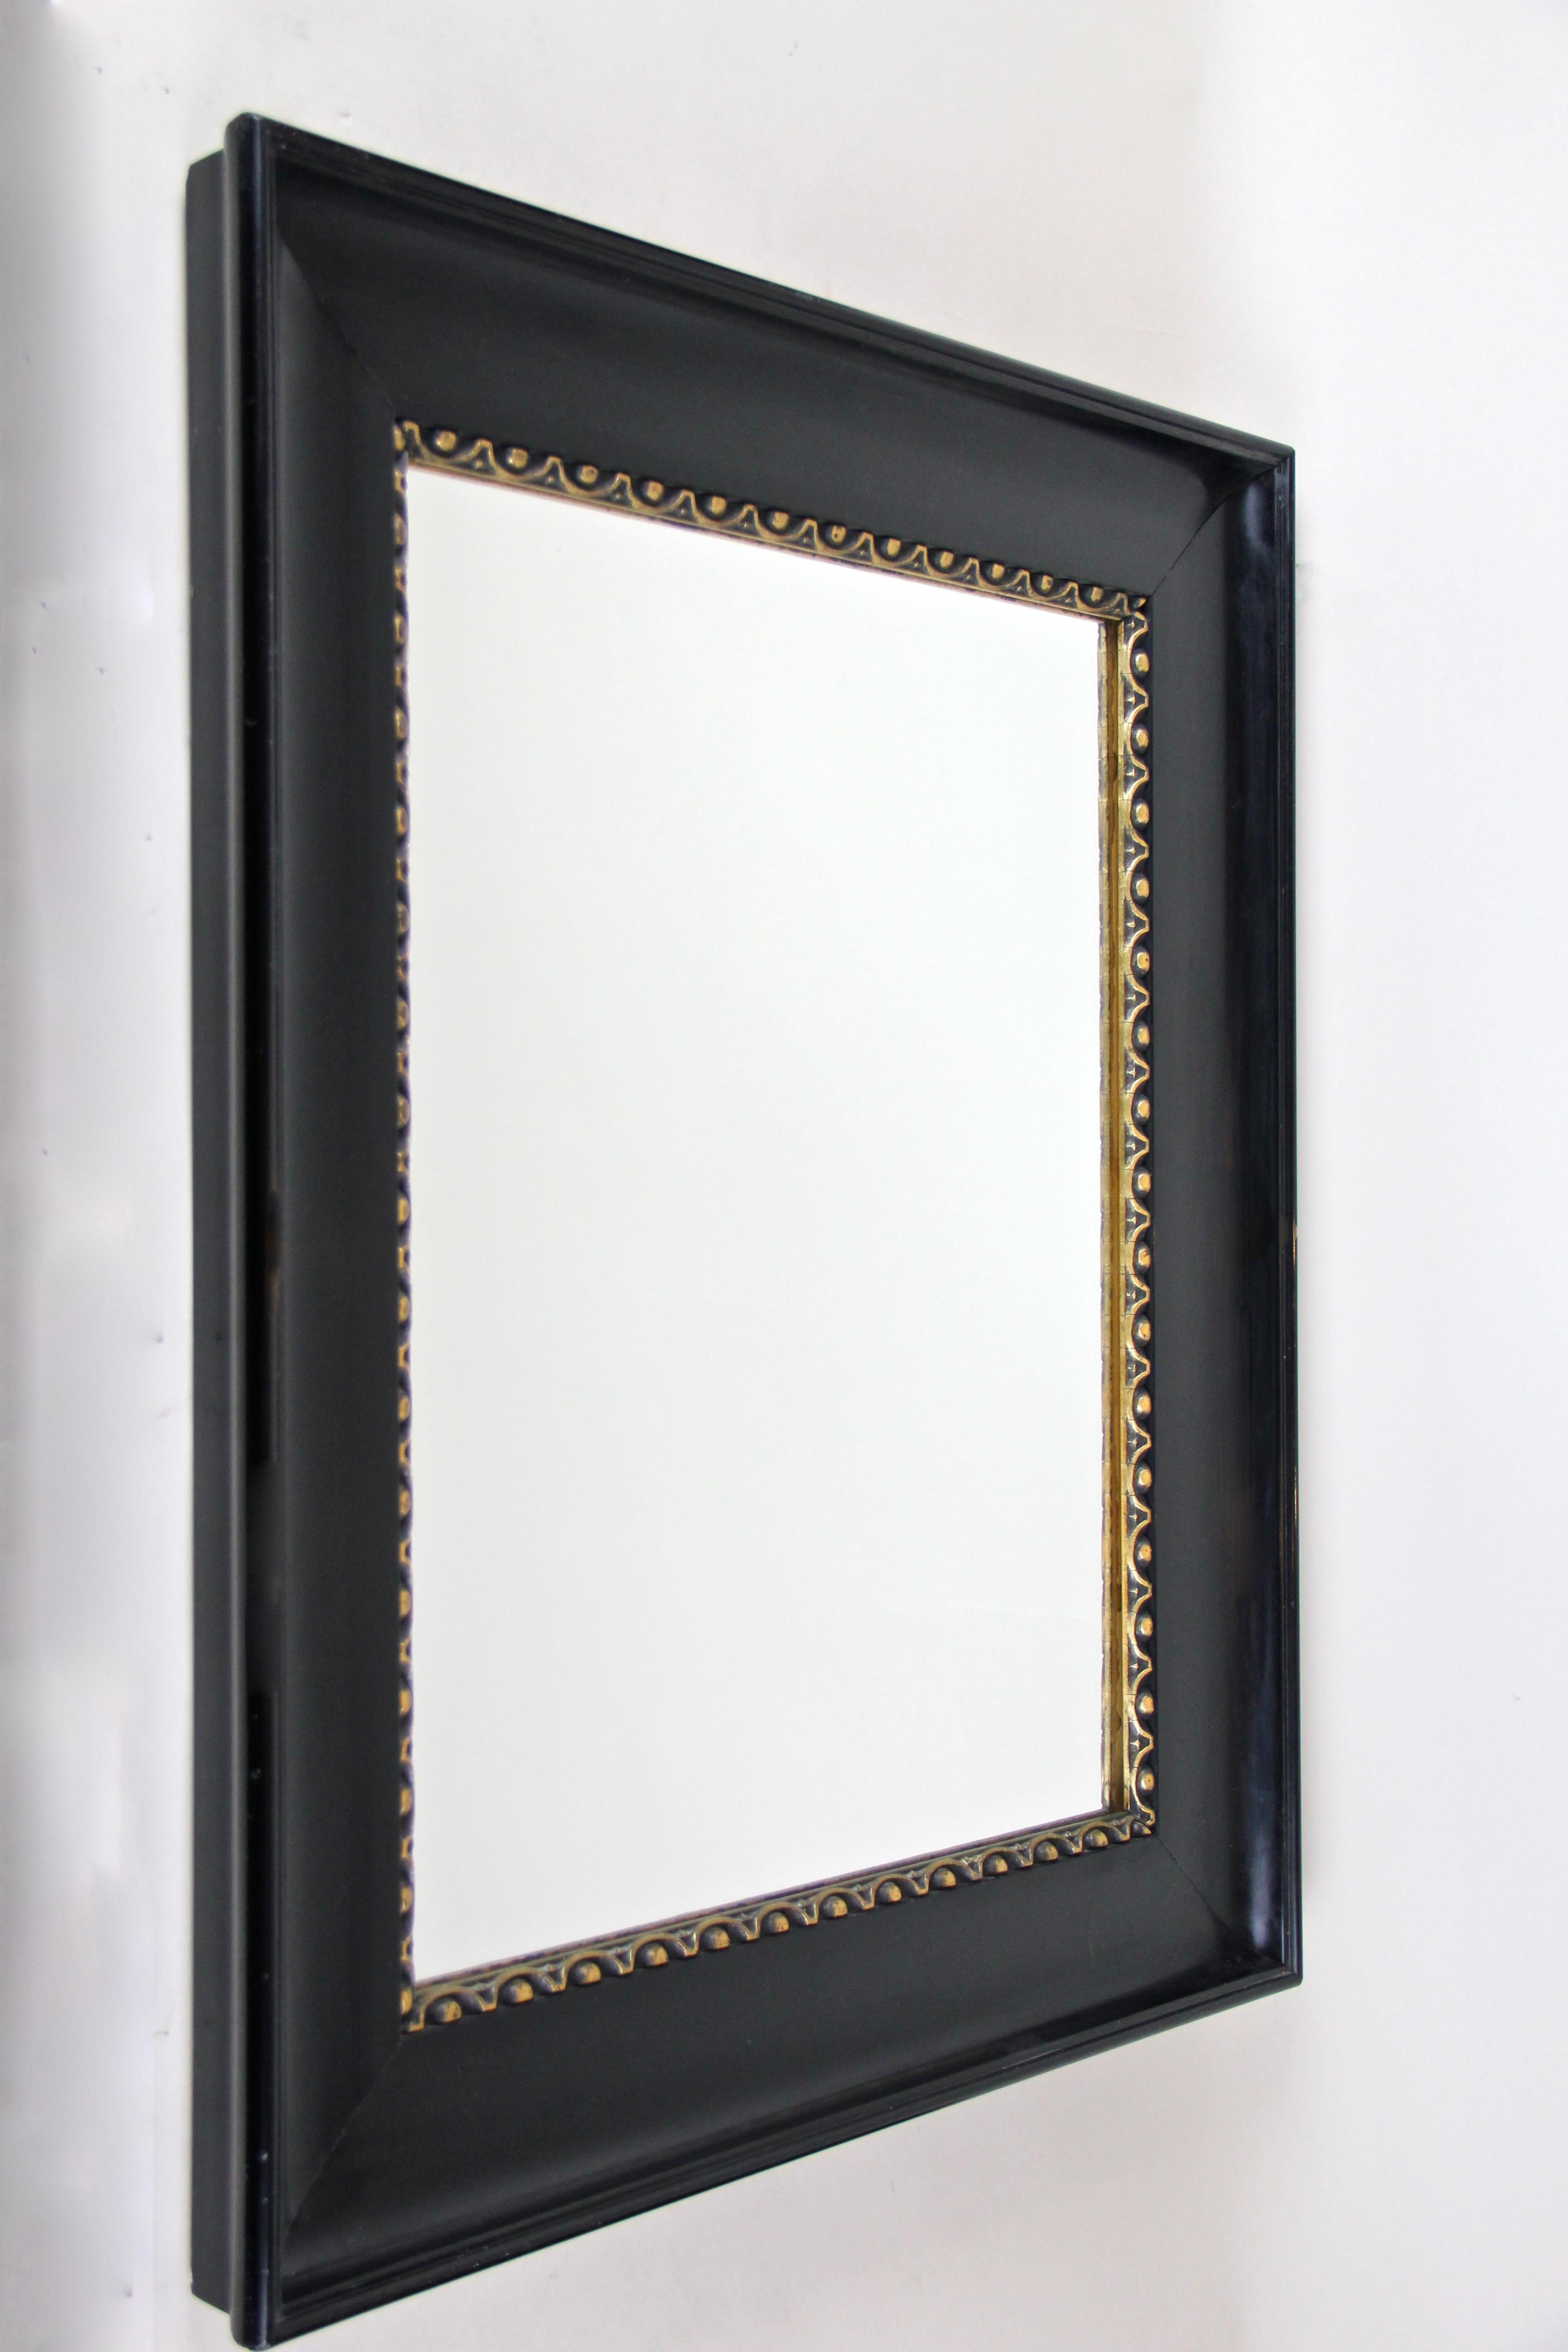 Delightful black lacquer wall mirror with gilt bars from circa 1900 in Austria. The pleasant black lacquered mirror shows a broad, chamfered glossy frame adorned by beautiful designed gilt stripes on the inside. Famous for the very early 20th